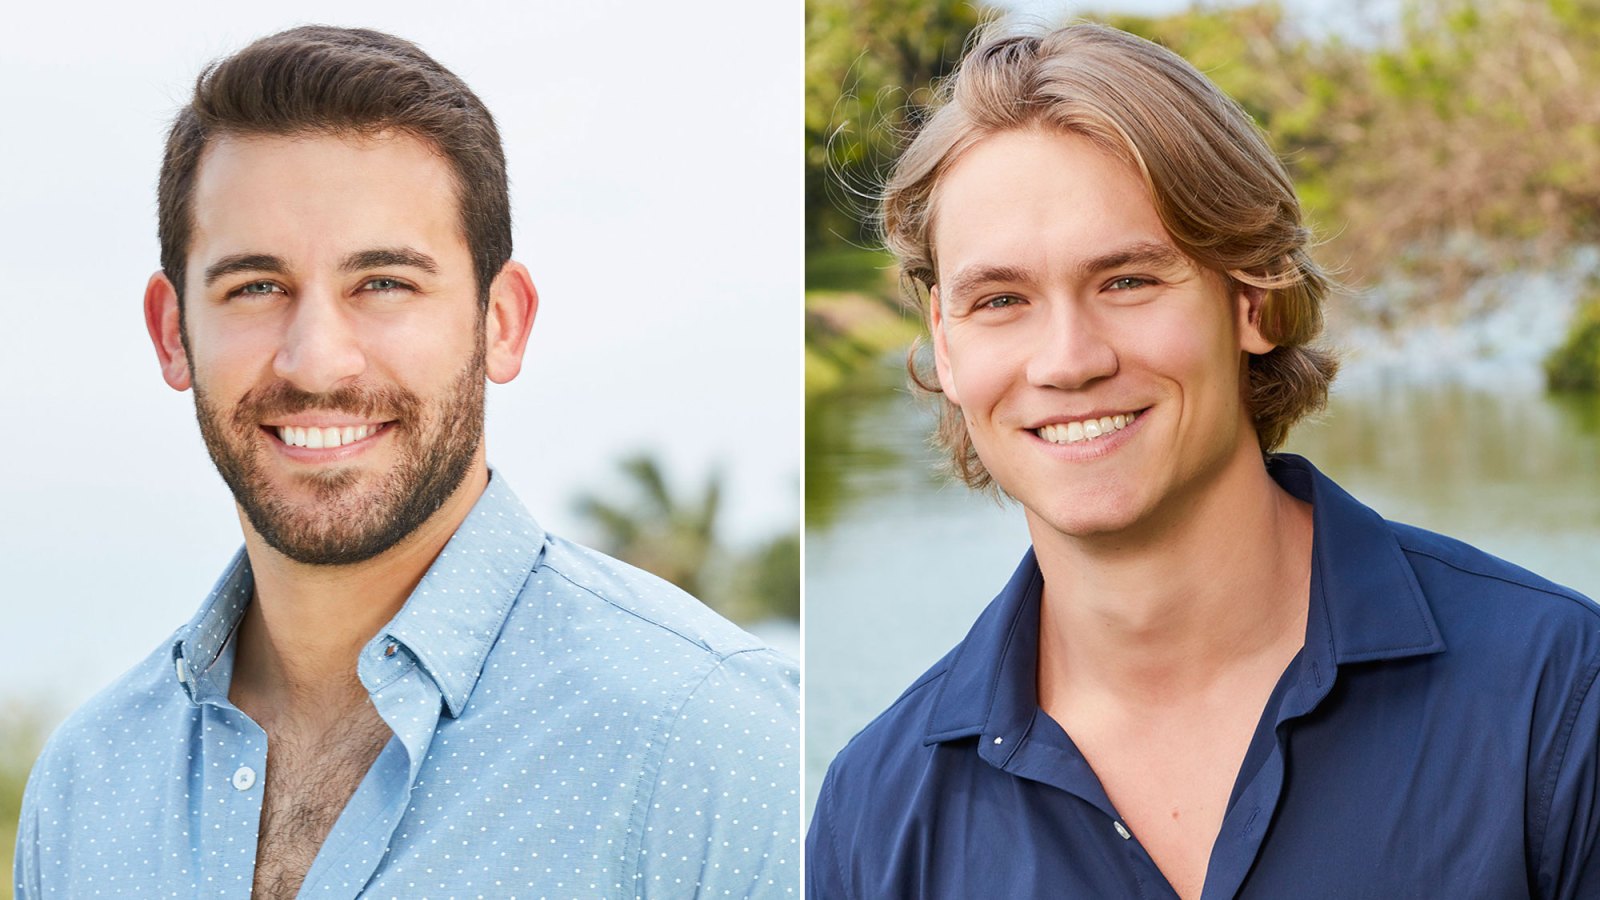 Bachelor in Paradise’s Derek Peth Slams John Paul Jones’ ‘Attempt to Save Face’ With Public Apology to Chris Randone and Krystal Nielson